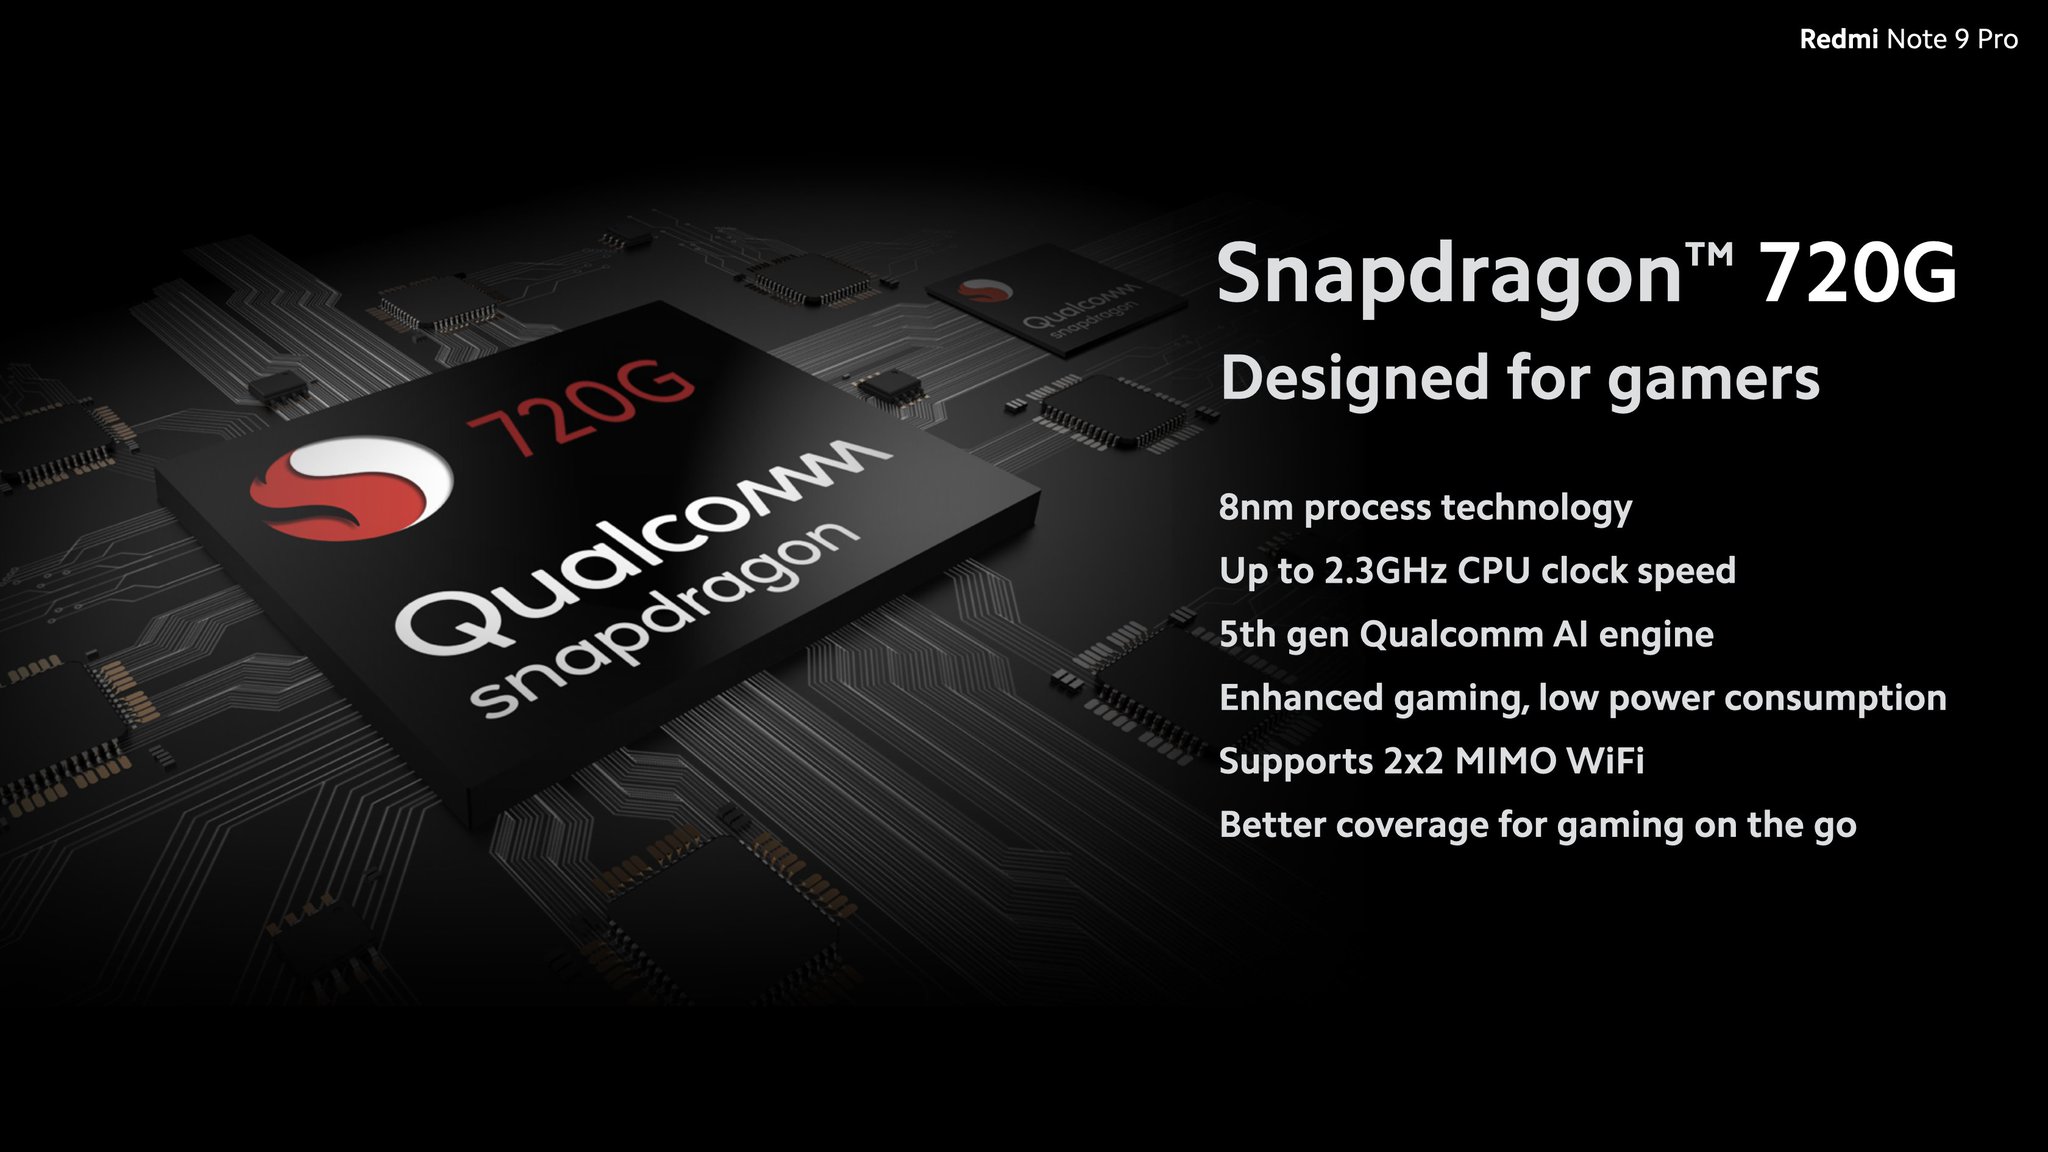 Xiaomi on Twitter: "Powered by Snapdragon 720G, #RedmiNote9Pro is ready to take your gaming into full throttle! #TheLegendContinues… "